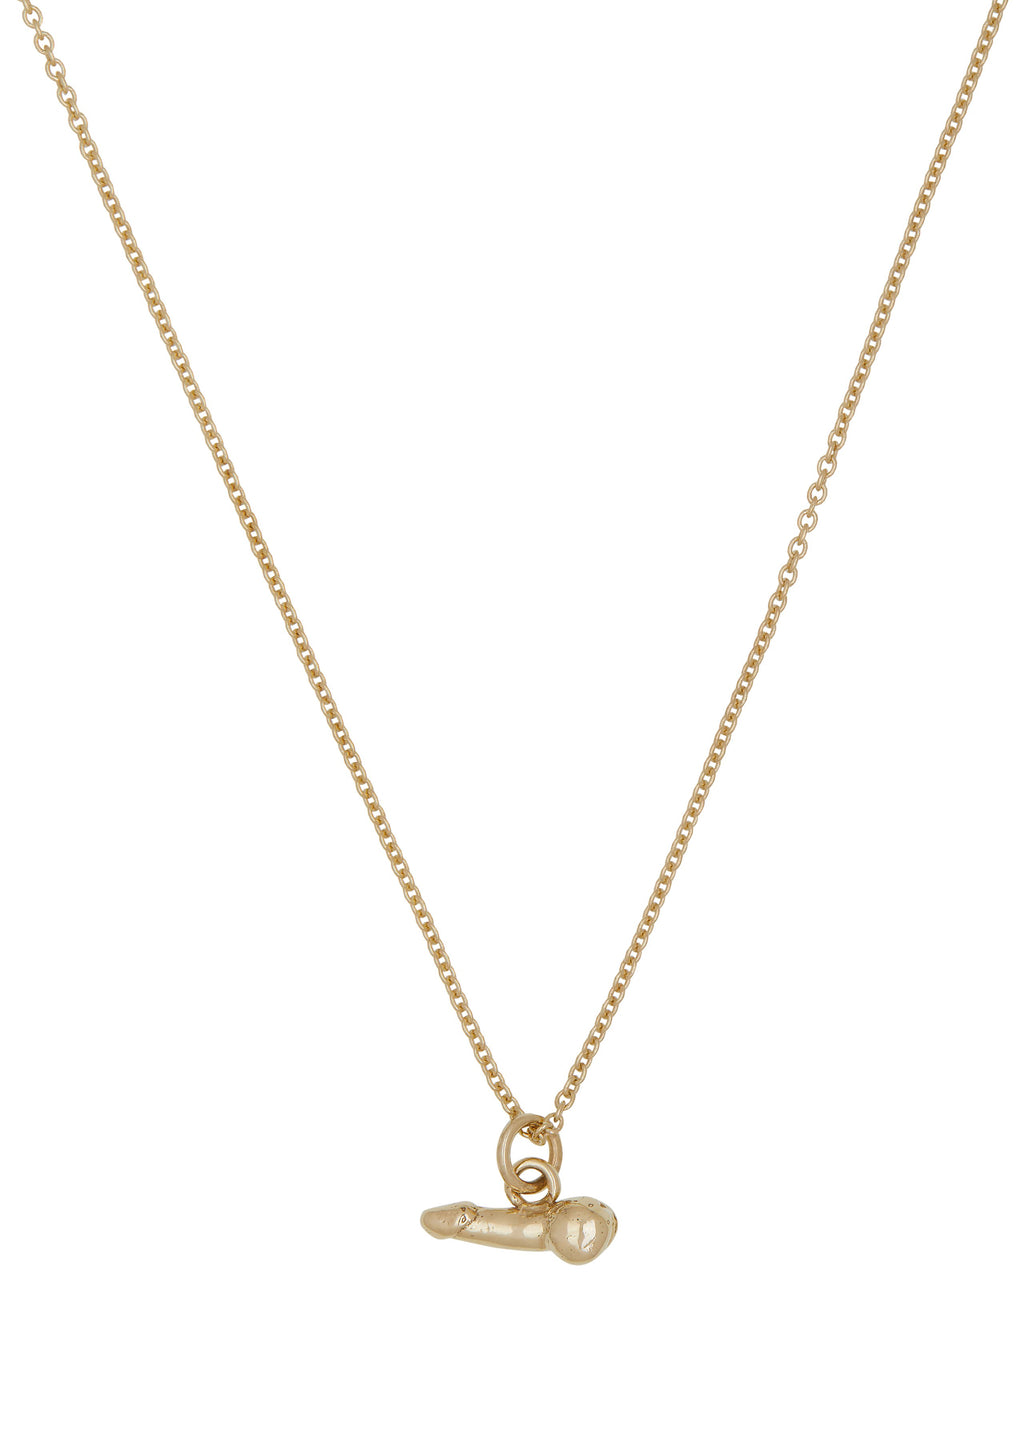 Animus Necklace in 14k